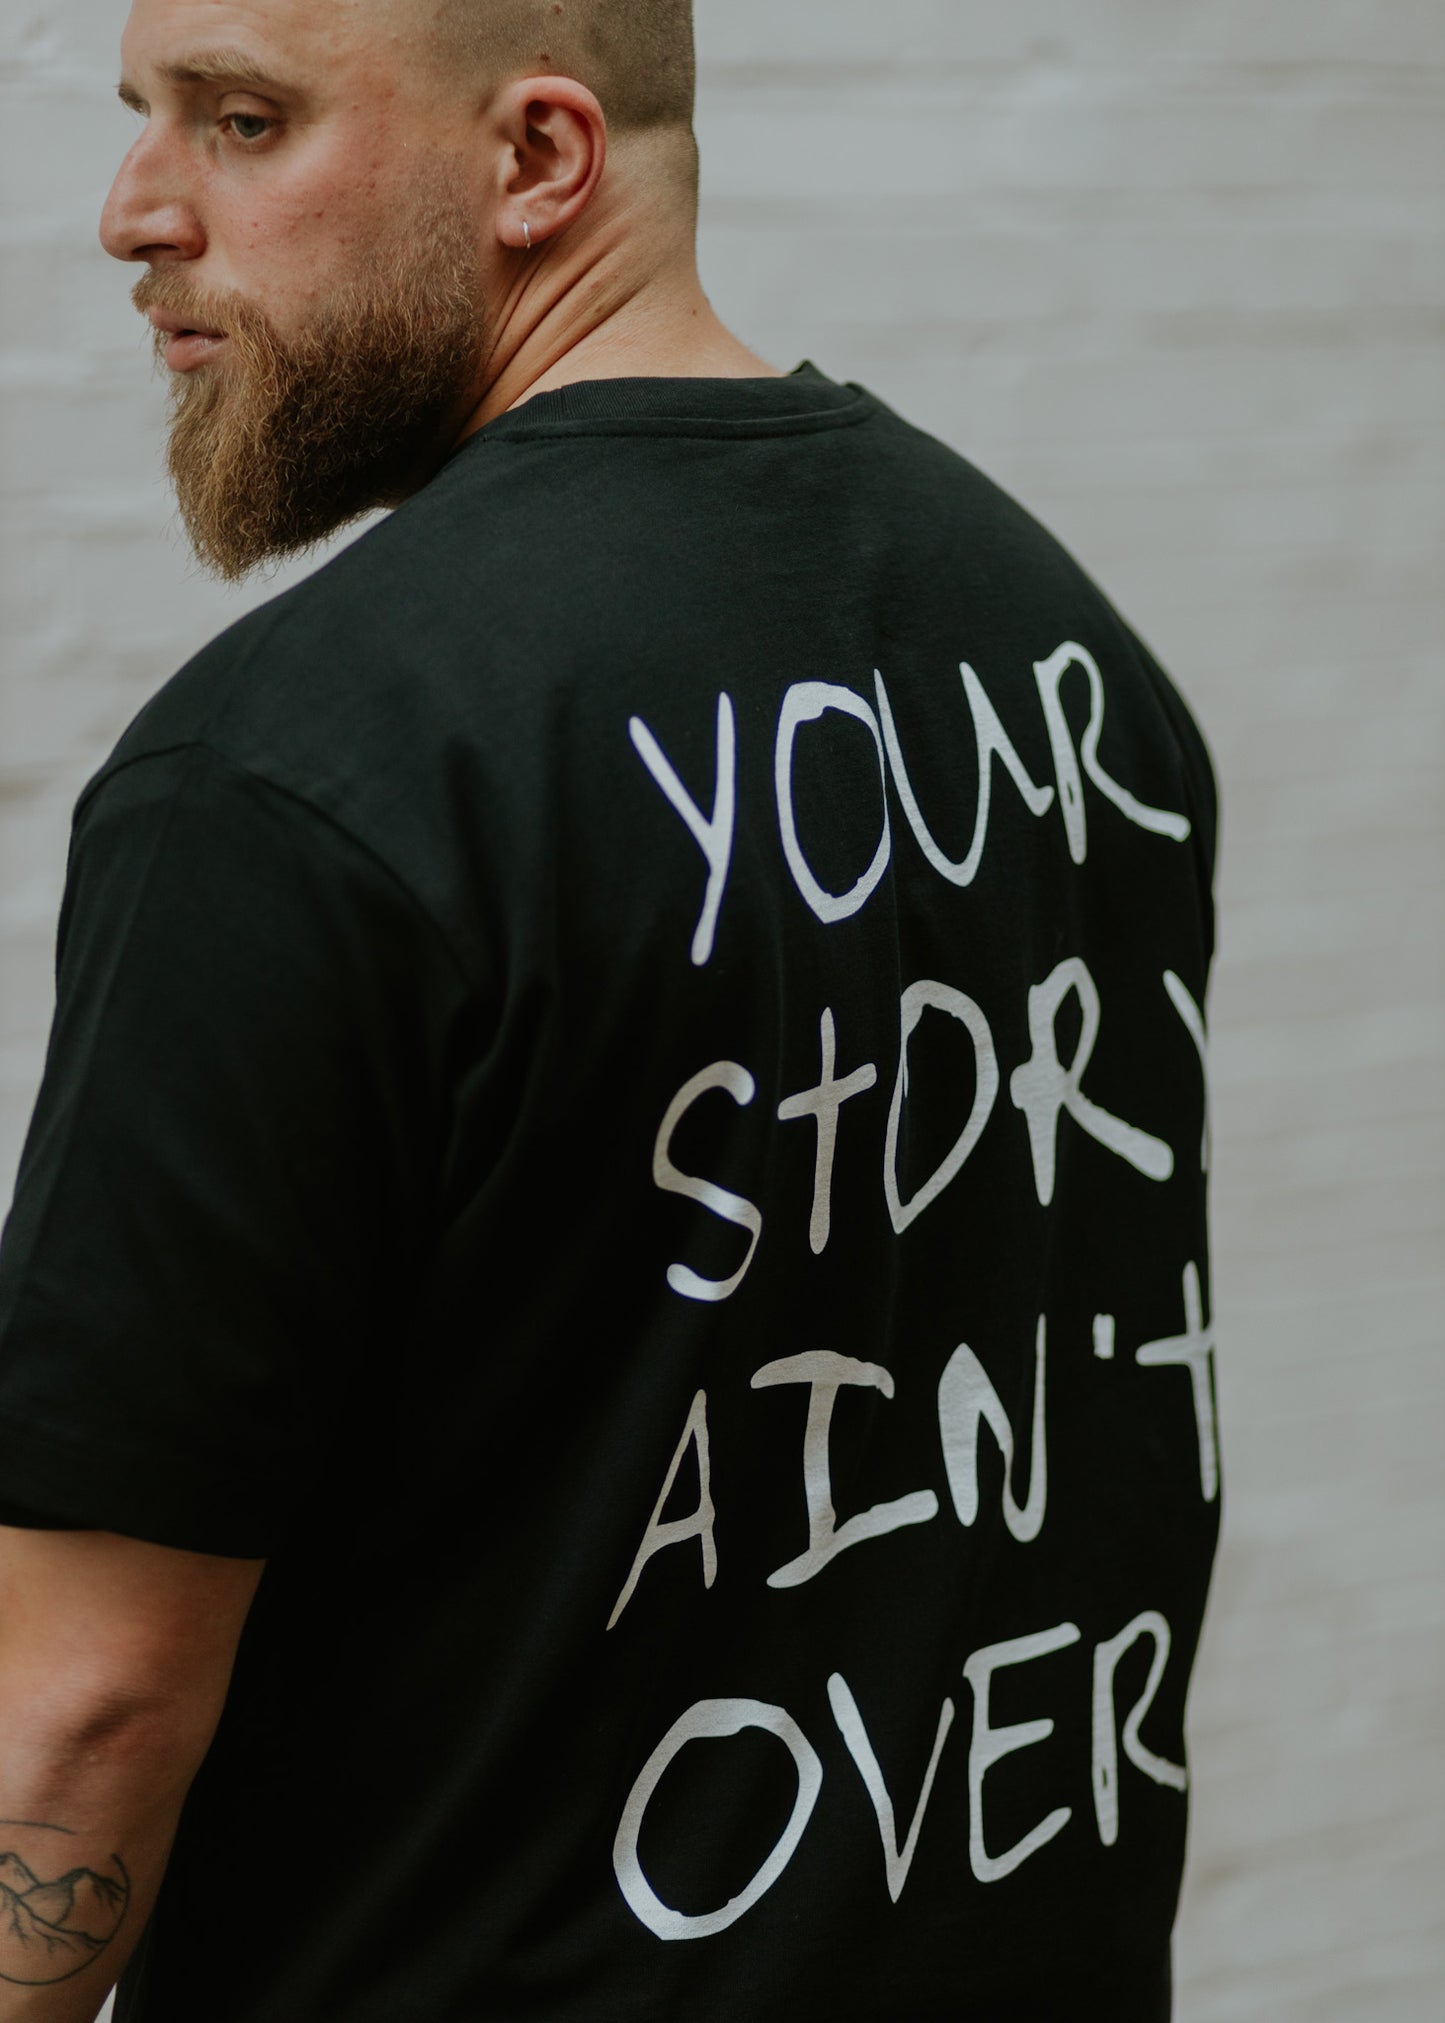 Your Story Ain't Over T-Shirt